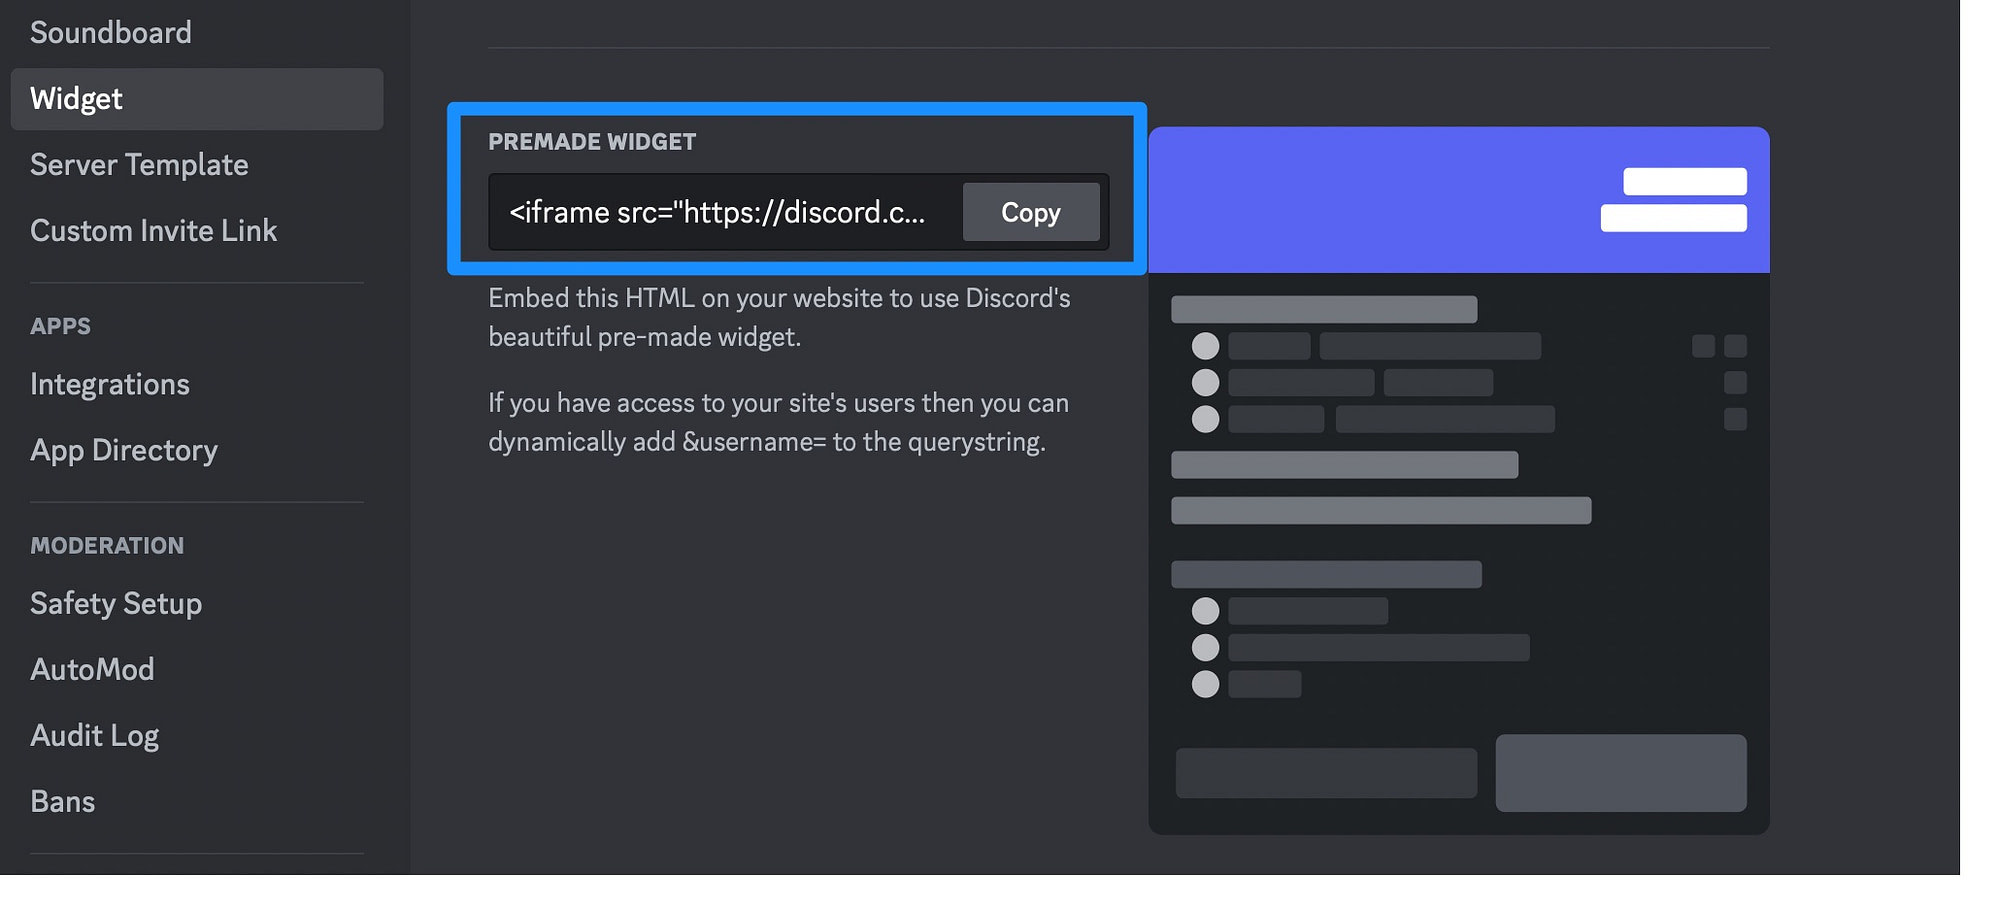 How to Embed a Discord Widget Into WordPress (In 3 Steps)